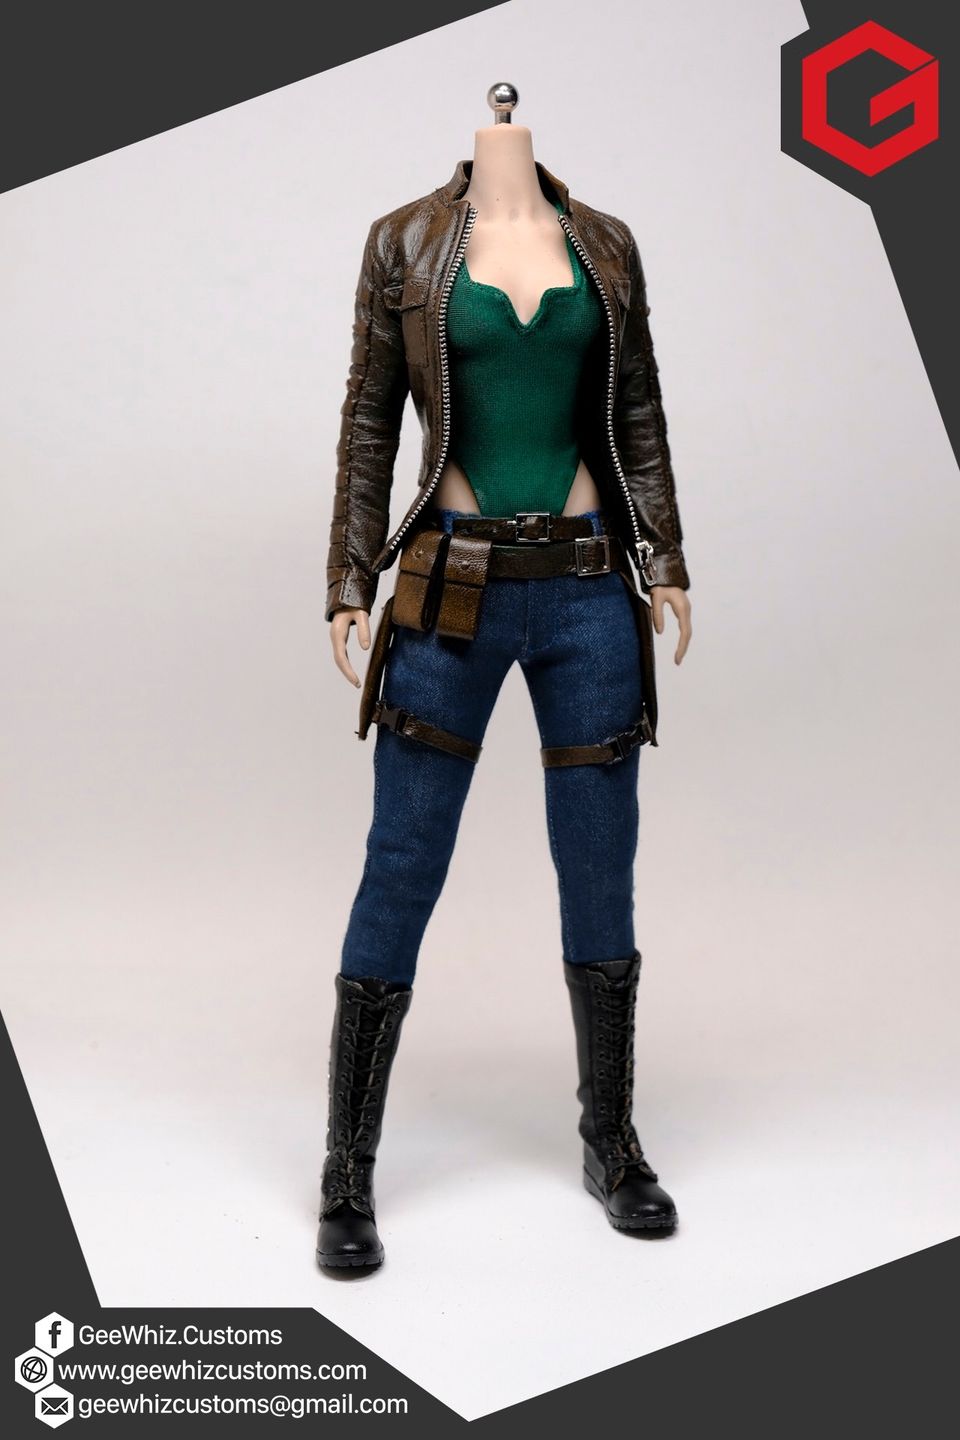 Geewhiz Customs: Lara Croft Concept Reboot 1:6 Scale Outfit